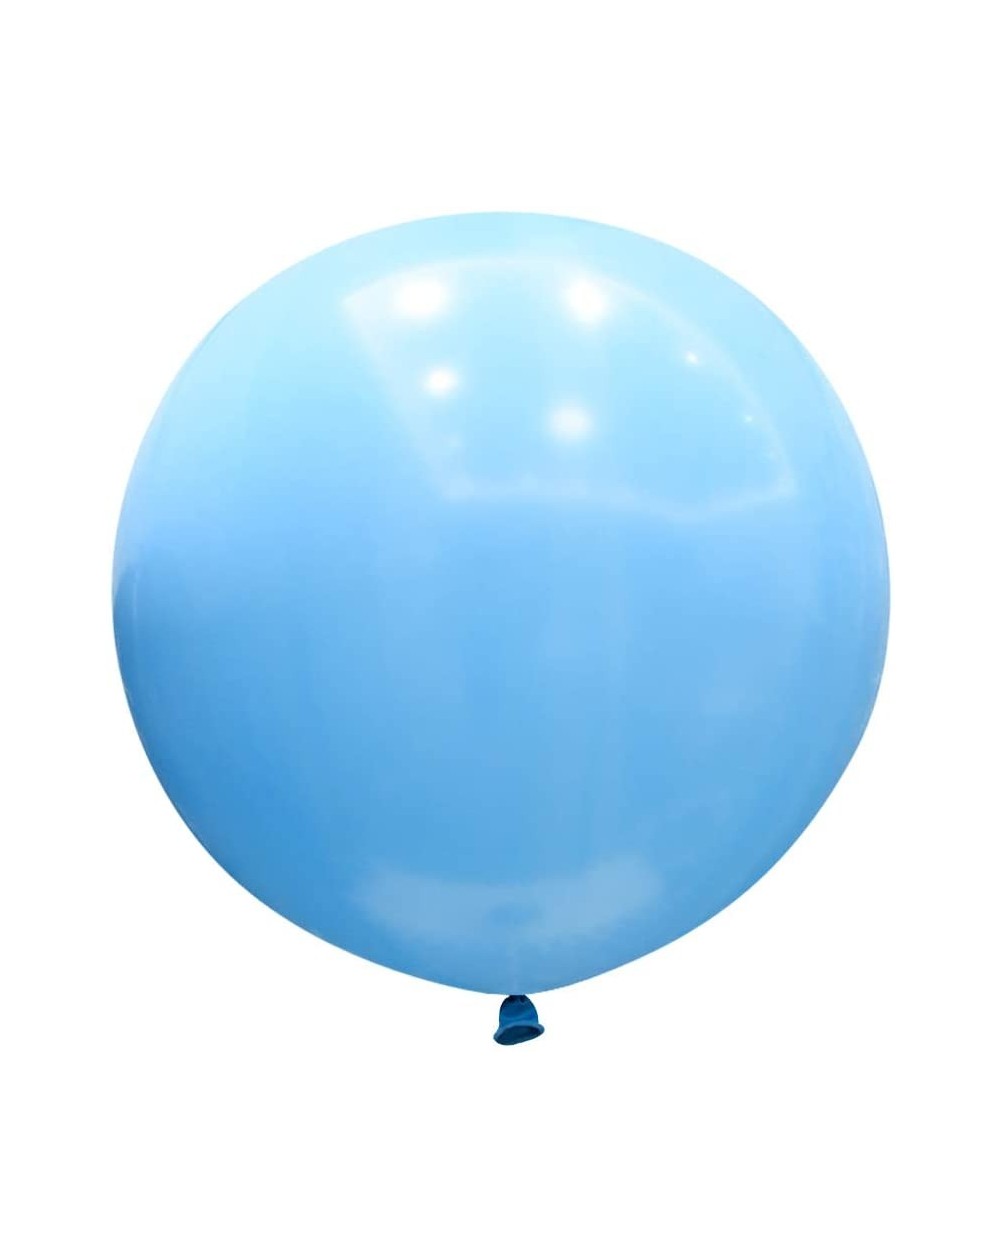 Balloons 36 Inch Giant Latex Balloons- Standard Light Blue Round Balloons for Birthdays Weddings Receptions Festival Party De...